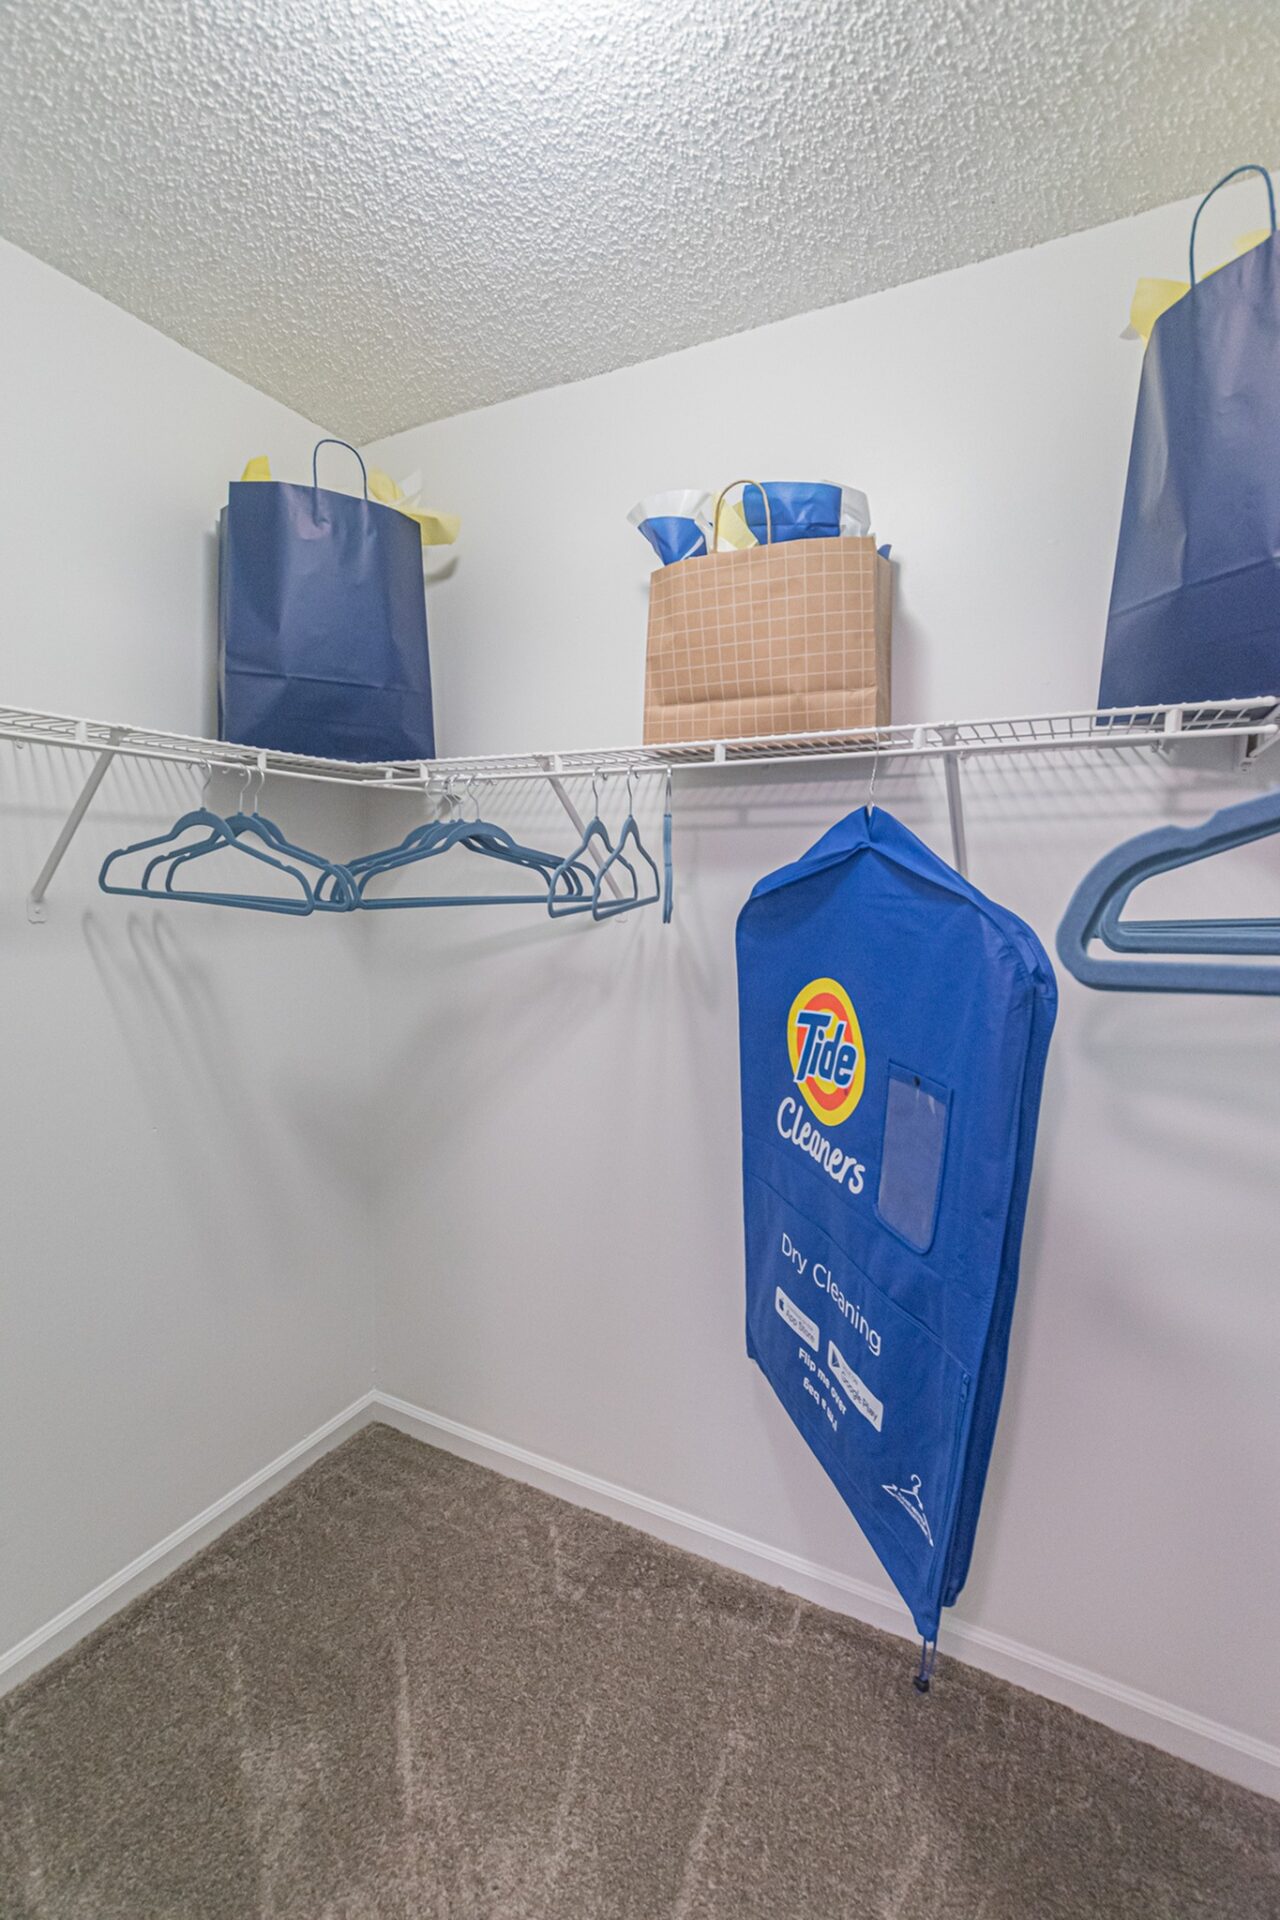 Spacious walk-in closet with shelves and hangers in an apartment at Beach Walk at Sheridan.